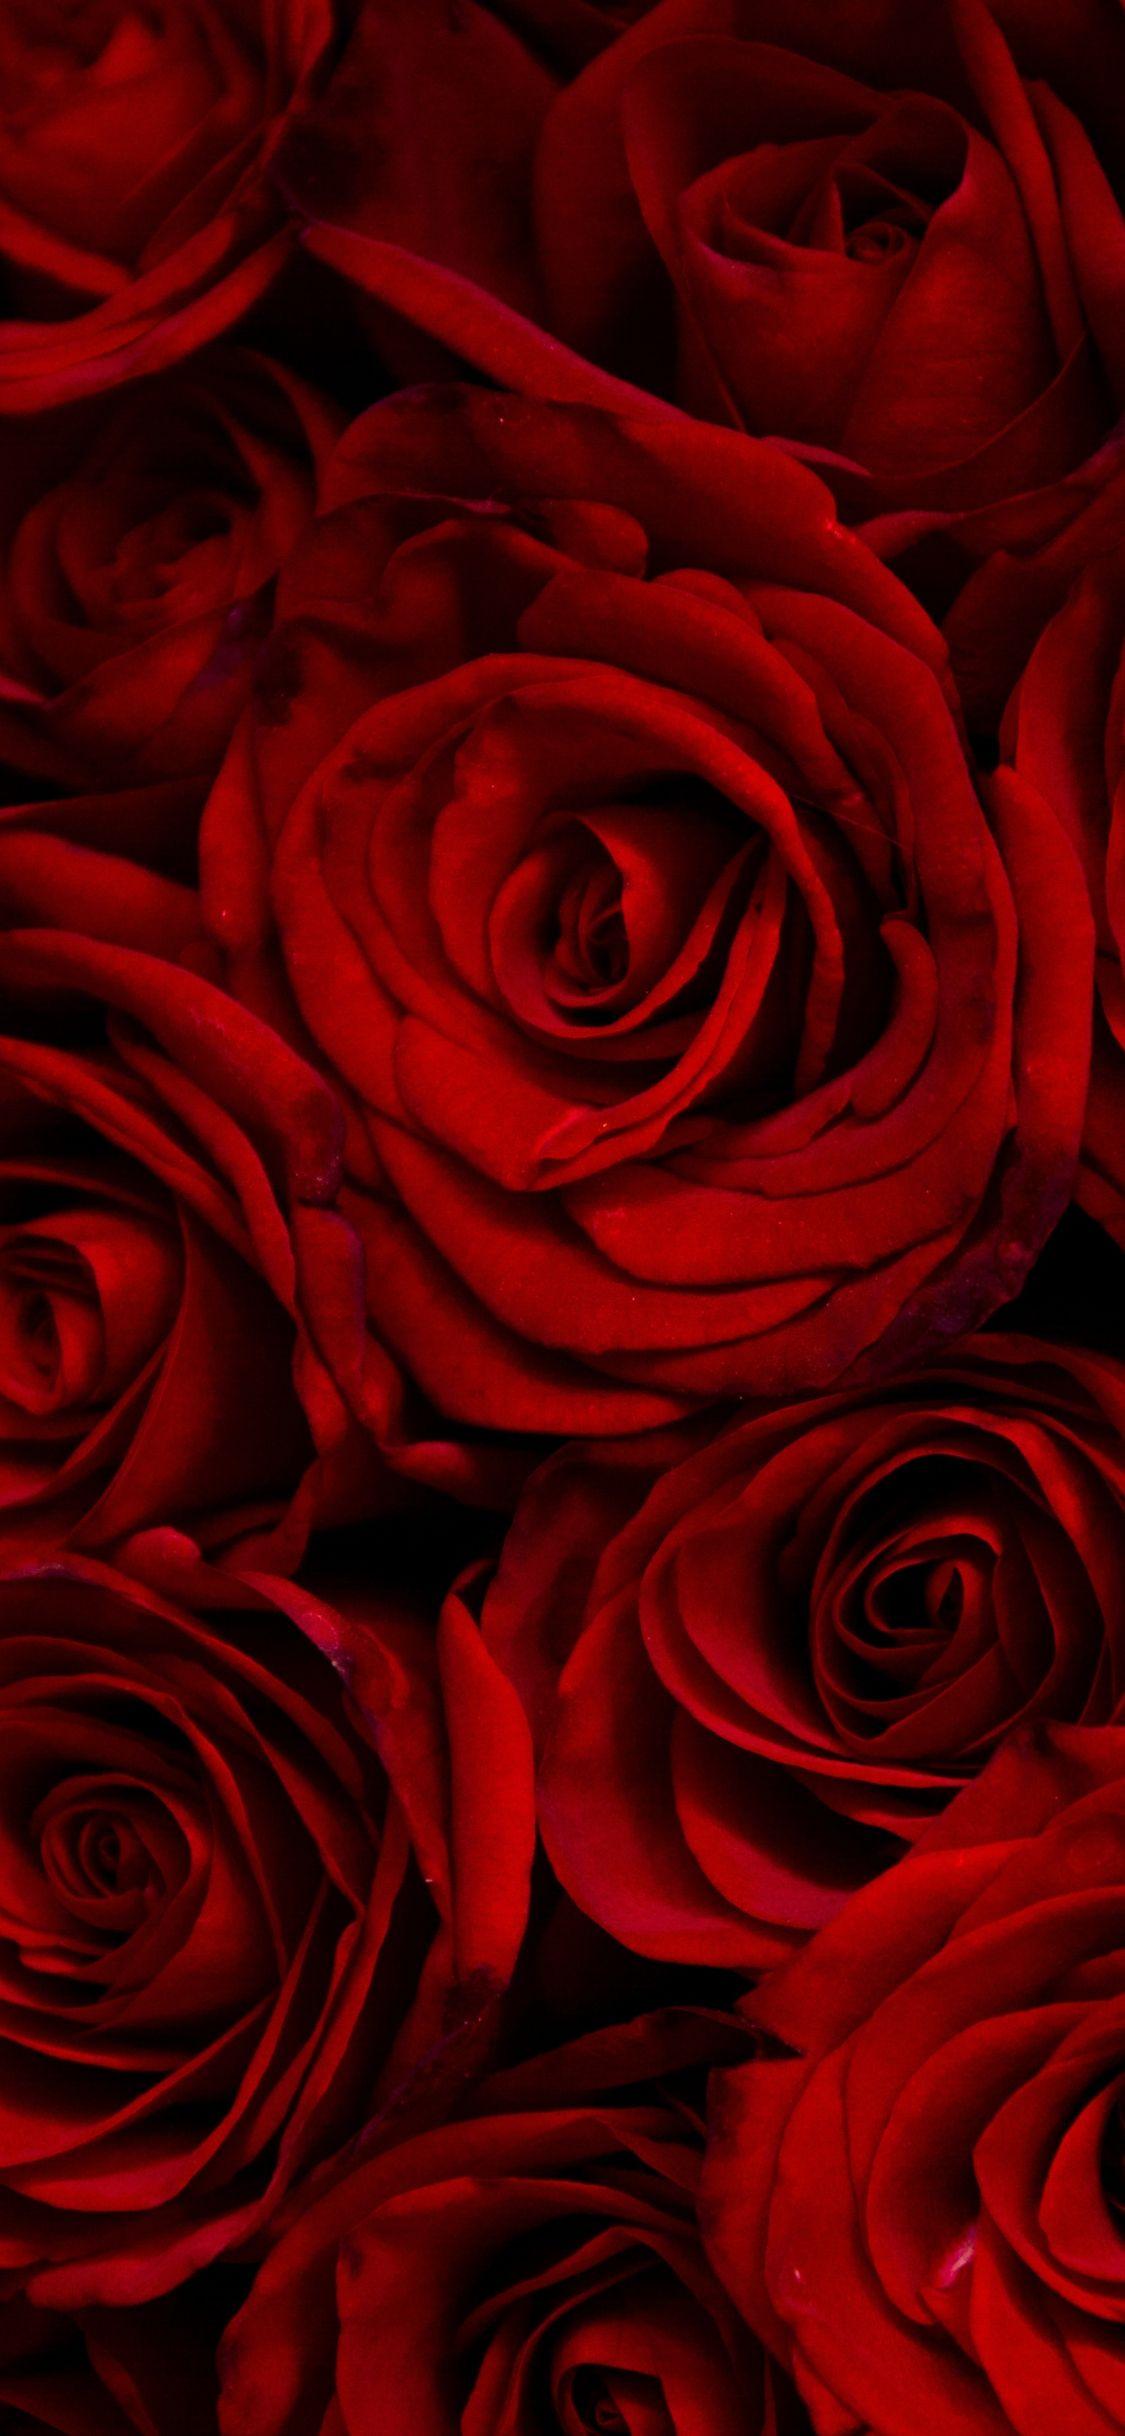 Red Roses iPhone Wallpapers - Top Free Red Roses iPhone Backgrounds ...